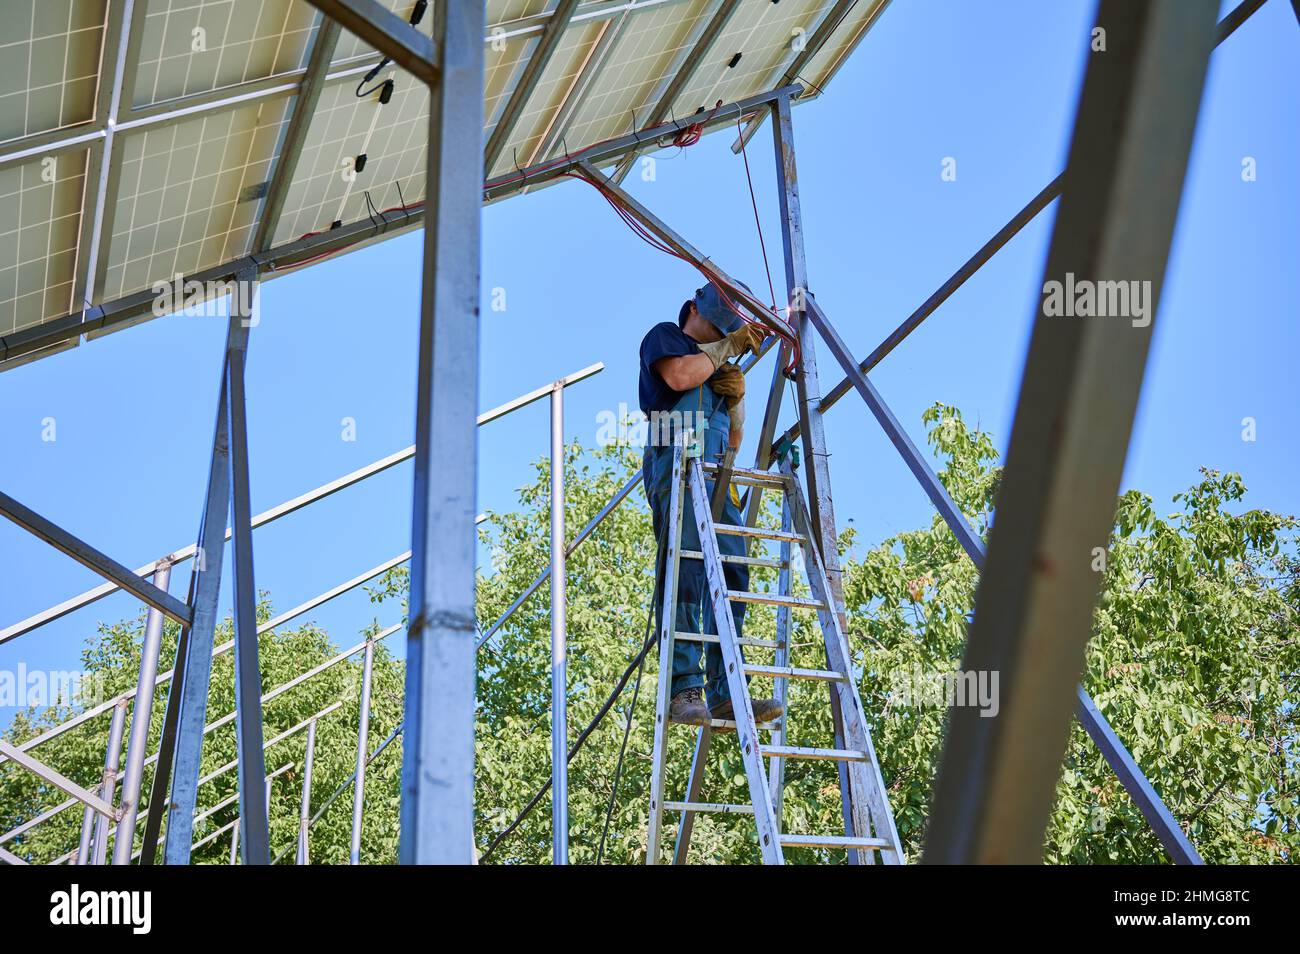 Male worker standing on ladder and welding metal poles of photovoltaic solar system. Man wearing safety welding mask while mounting support structures for solar panels. Stock Photo